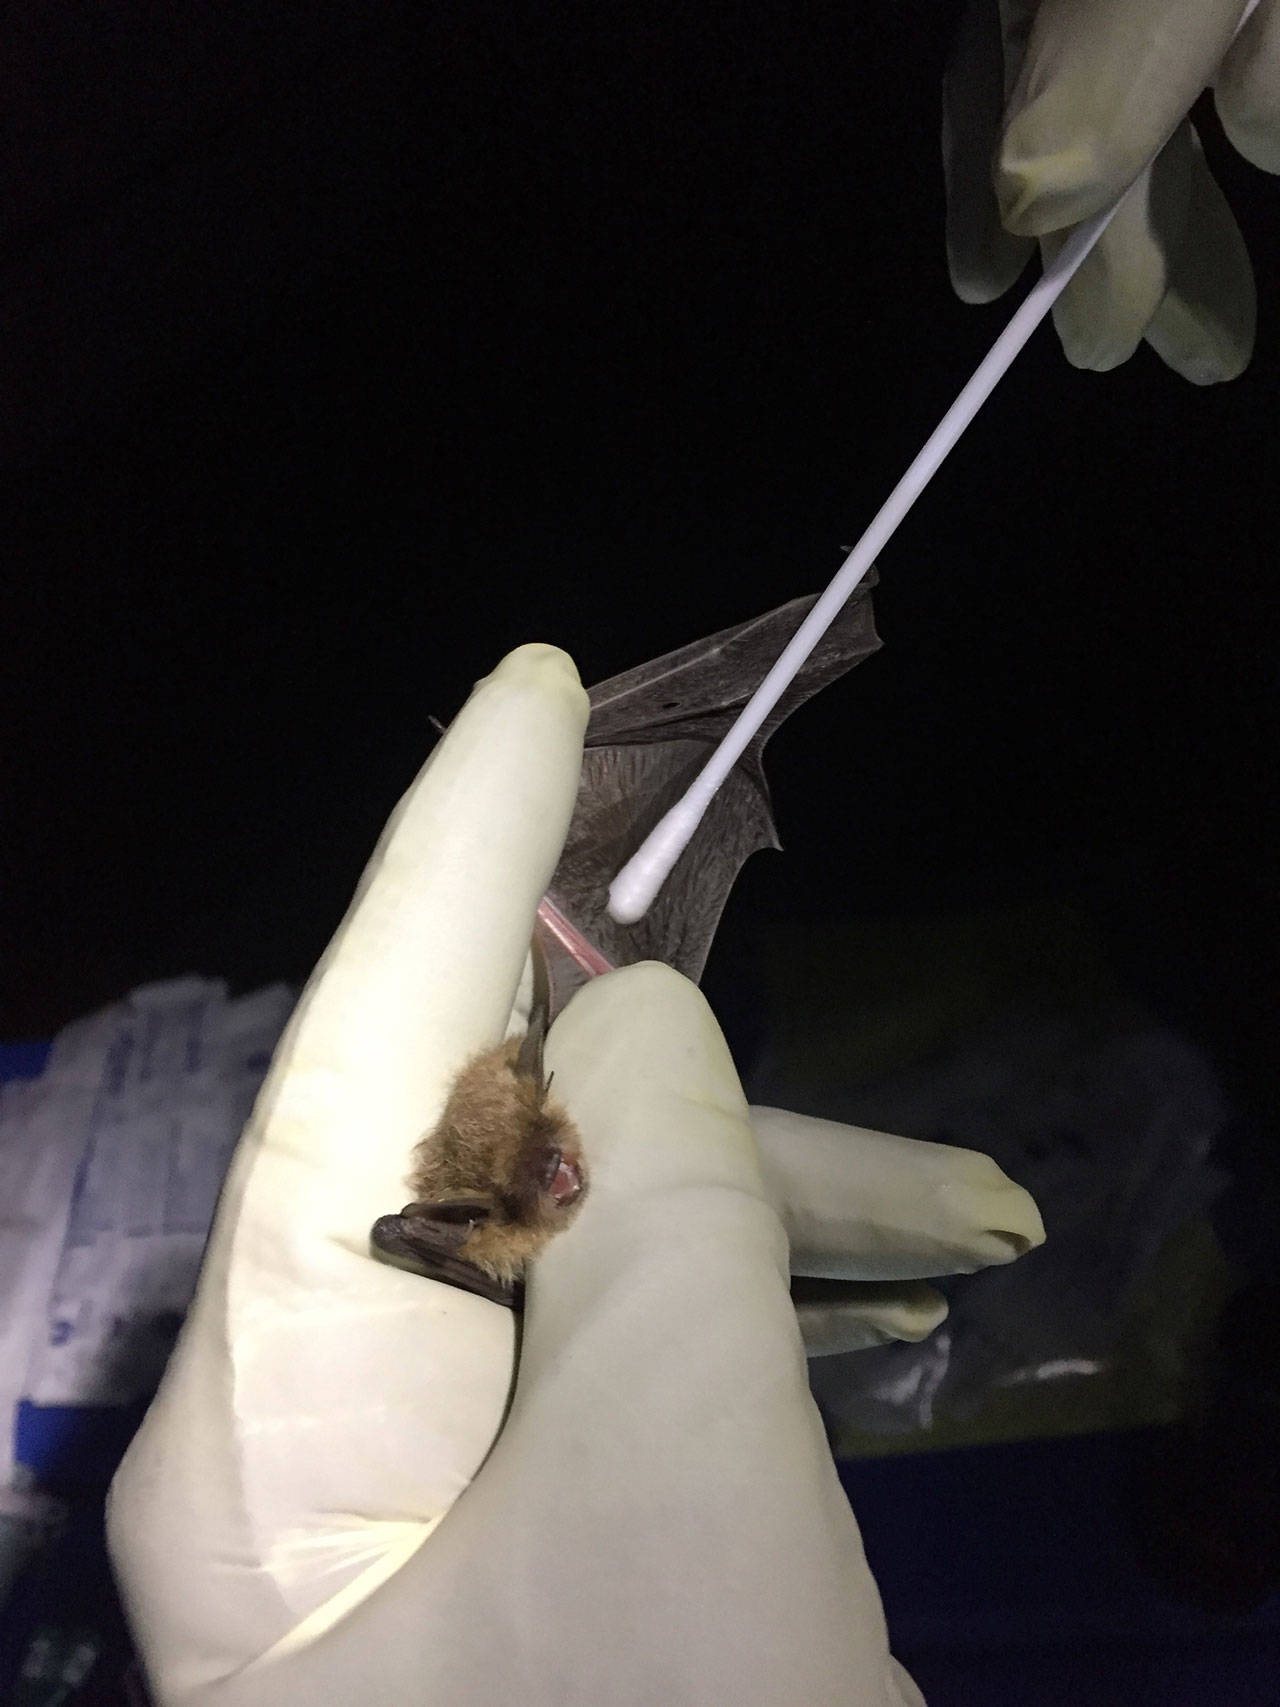 Researcher swabs a bat’s wing to collect a sample to test for the presence of the fungus that causes white-nose syndrome. Photo courtesy of Washington Department of Fish & Wildlife